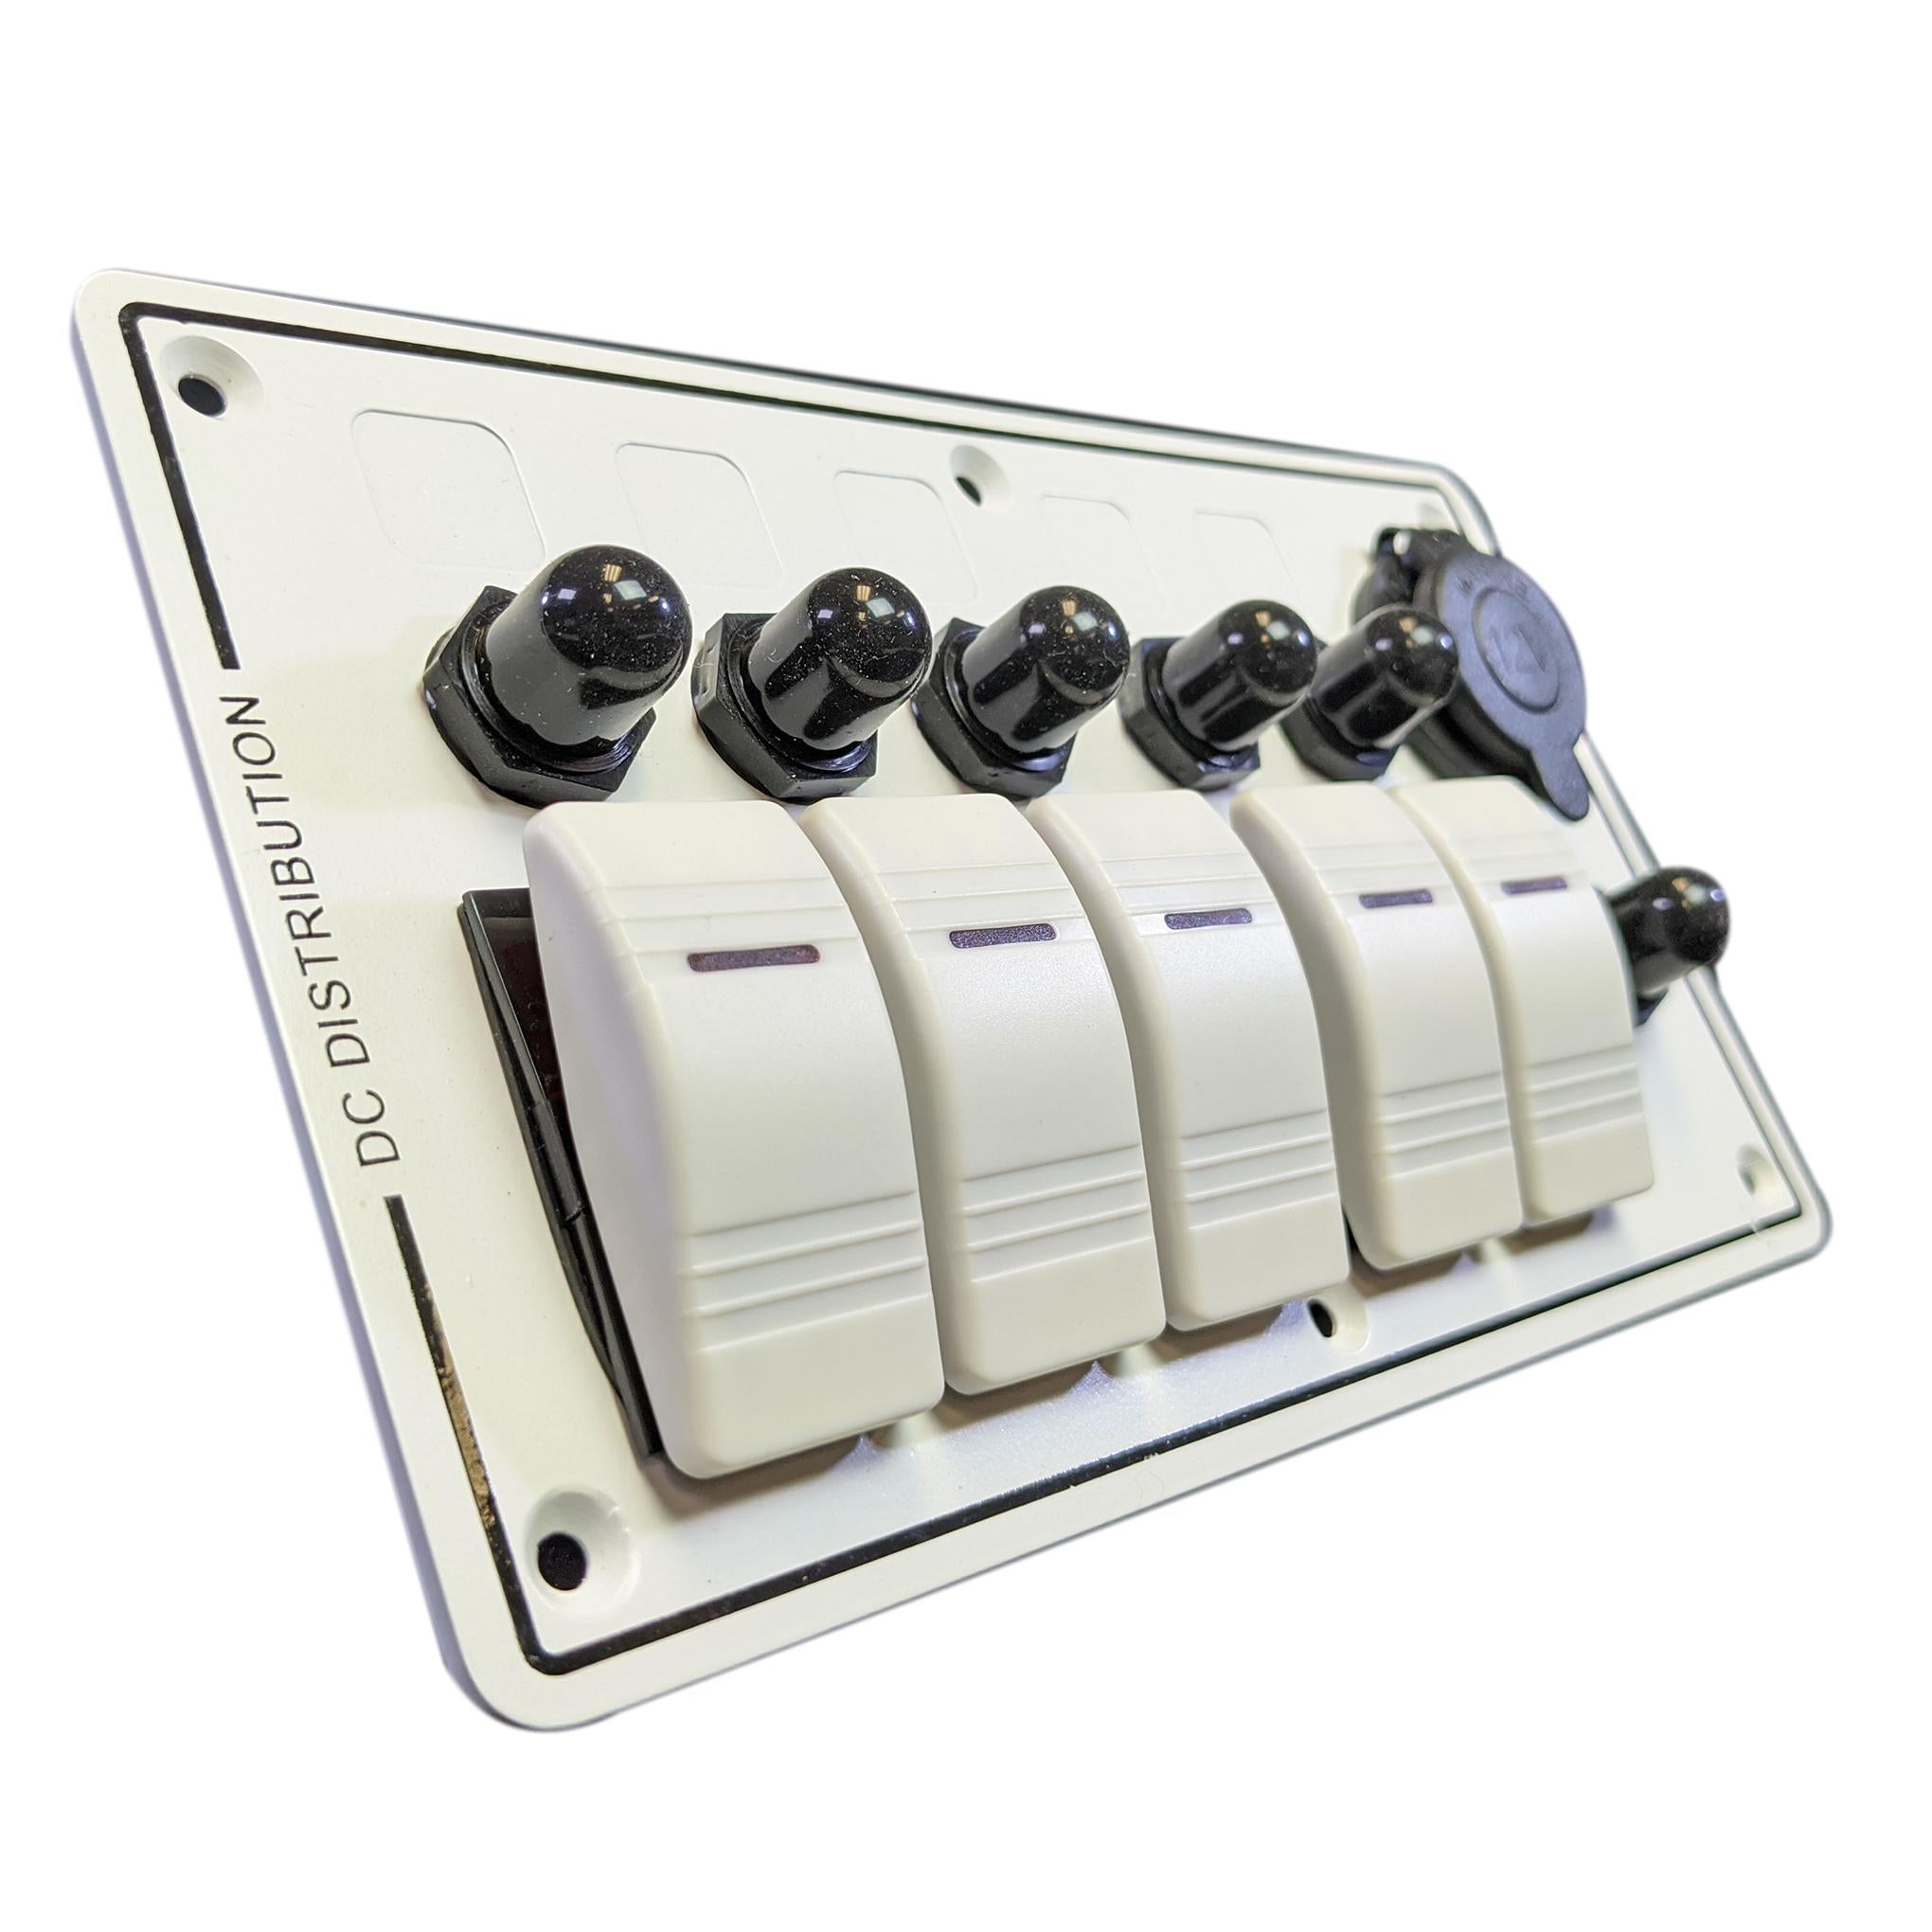 5 Switch Panel with Breakers - Marine